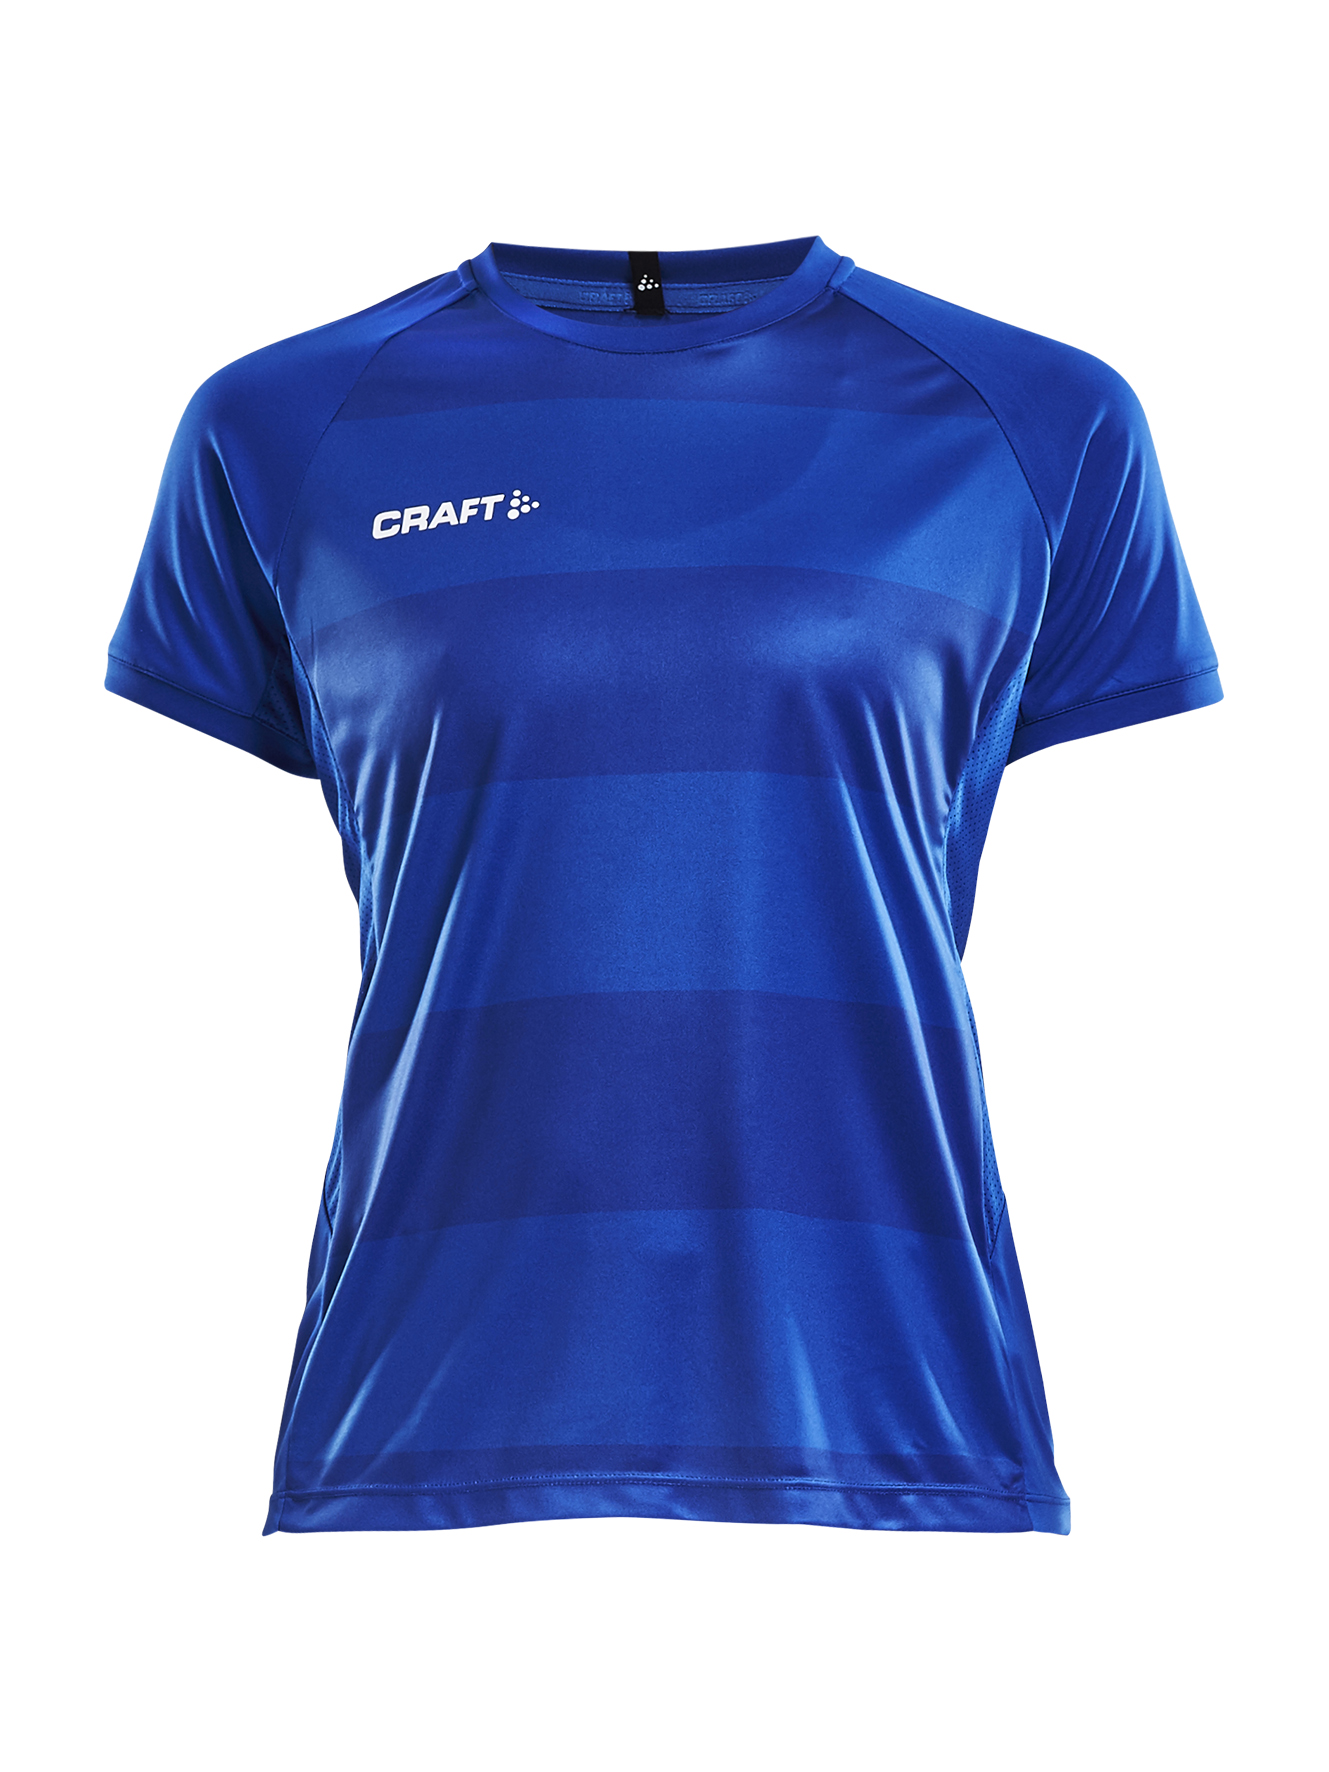 Craft PROGRESS Jersey Graphic WMN ROYAL BLUE (TONE IN TONE)